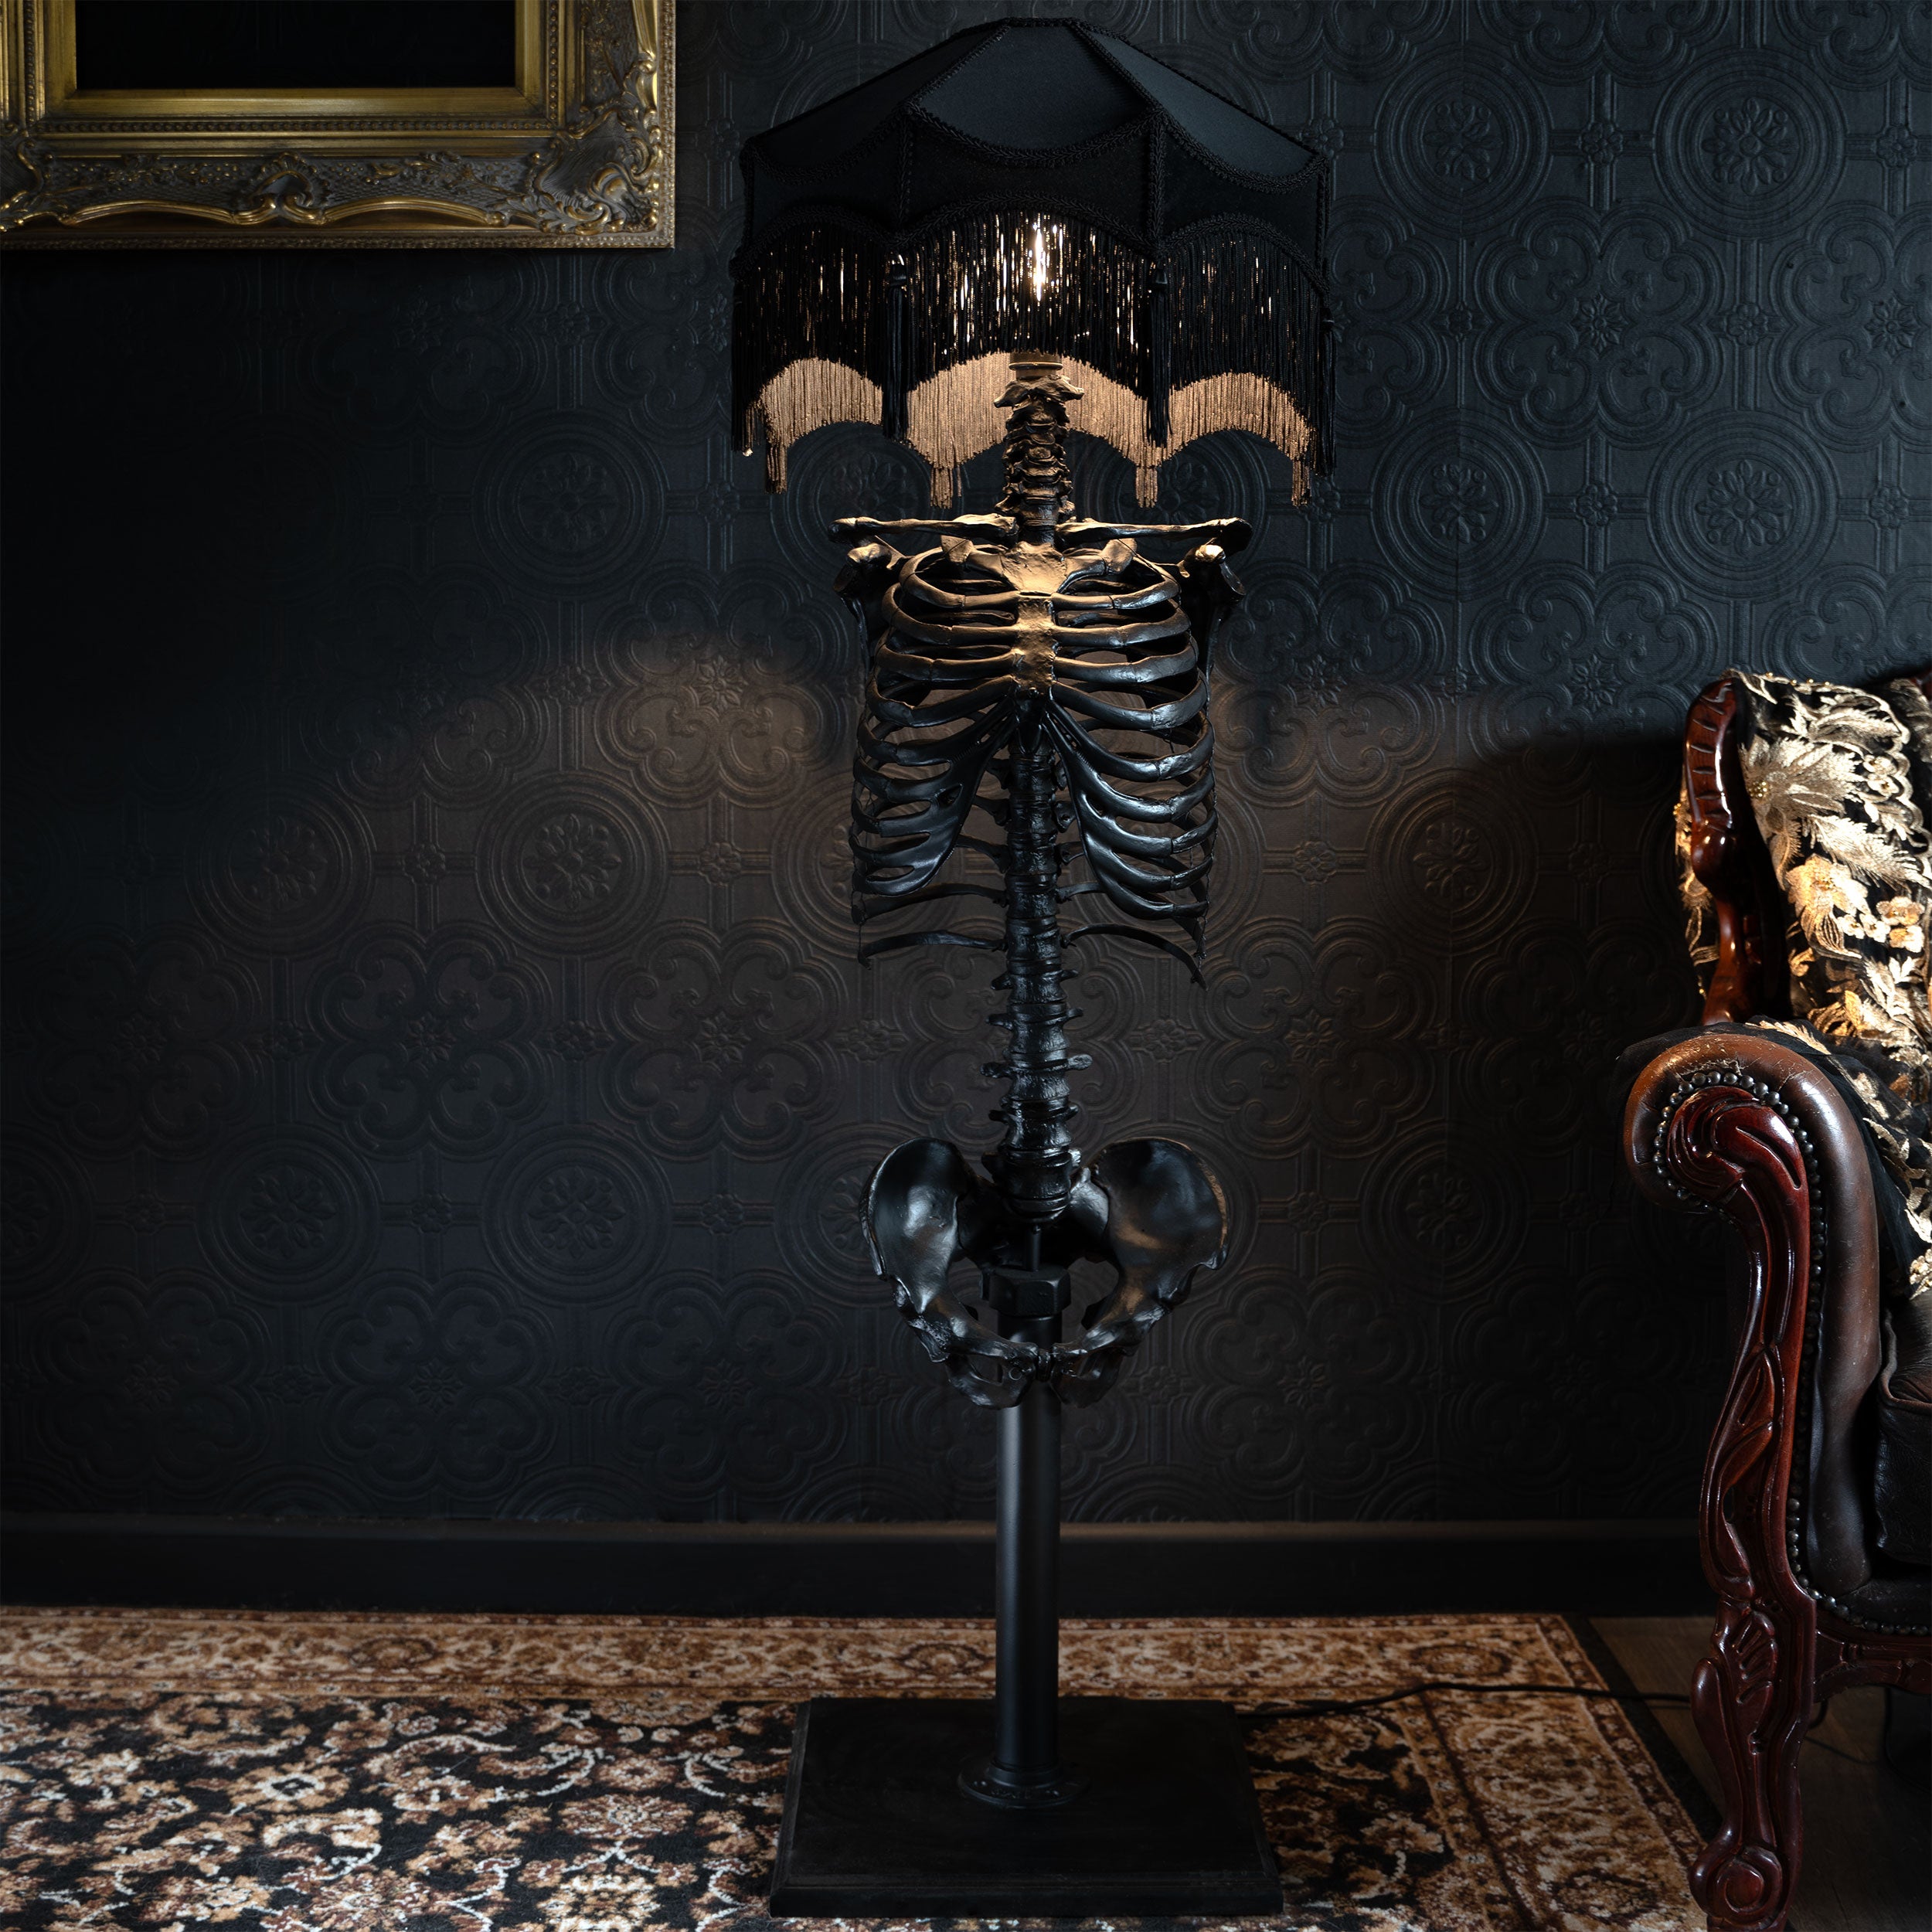 The Skeleton Floor Lamp - Jetta Baroque Edition by The Blackened Teeth